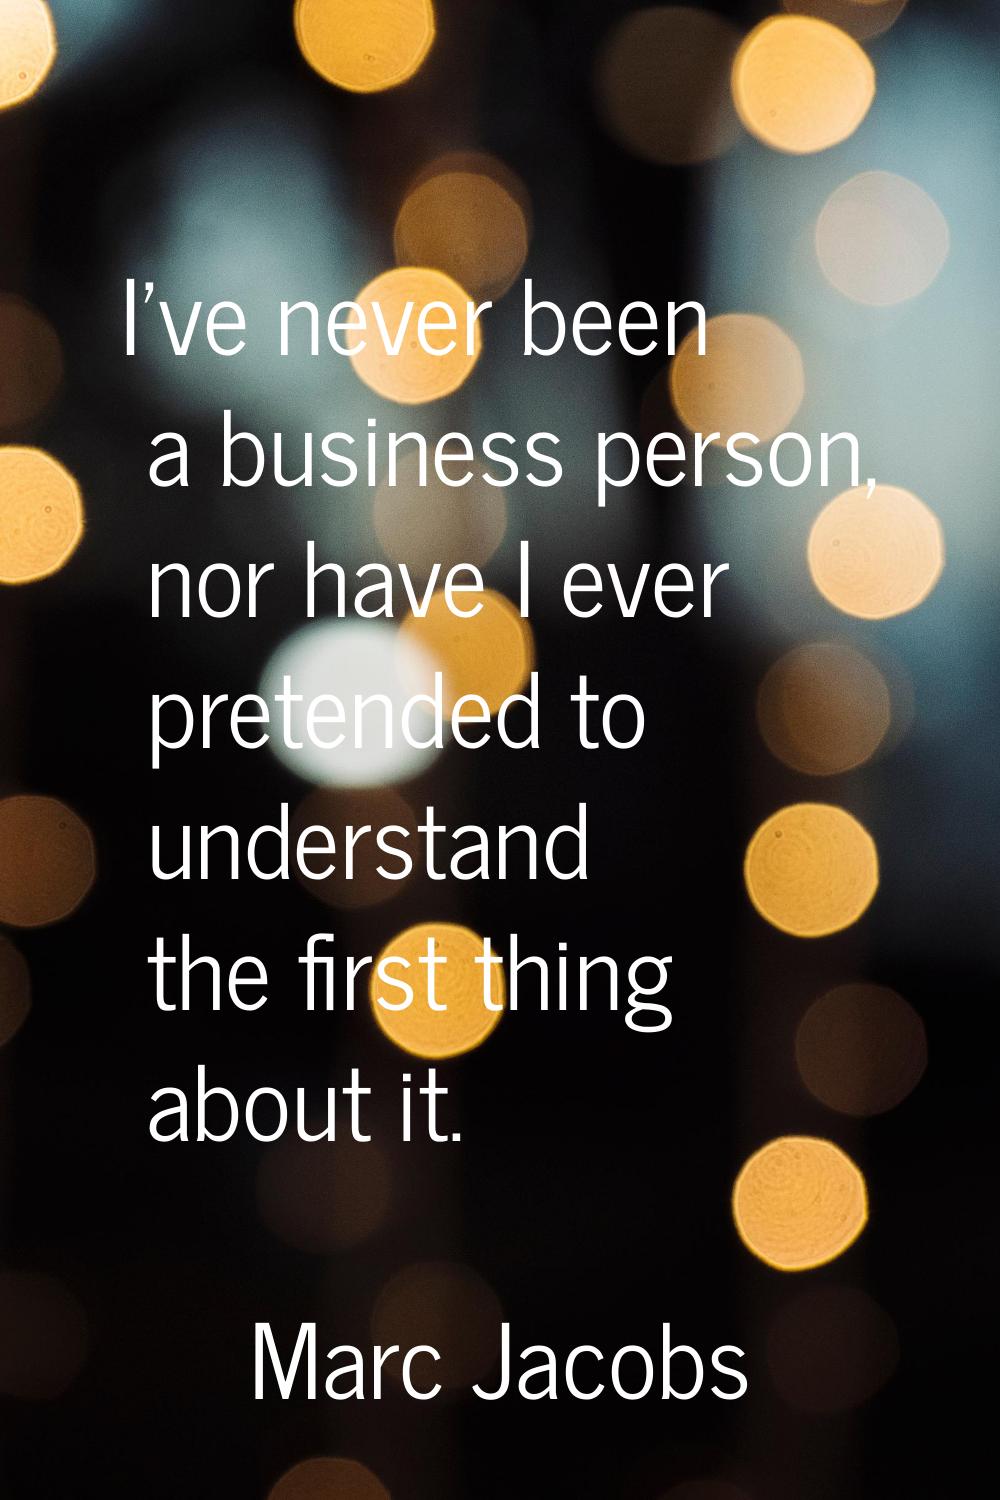 I've never been a business person, nor have I ever pretended to understand the first thing about it